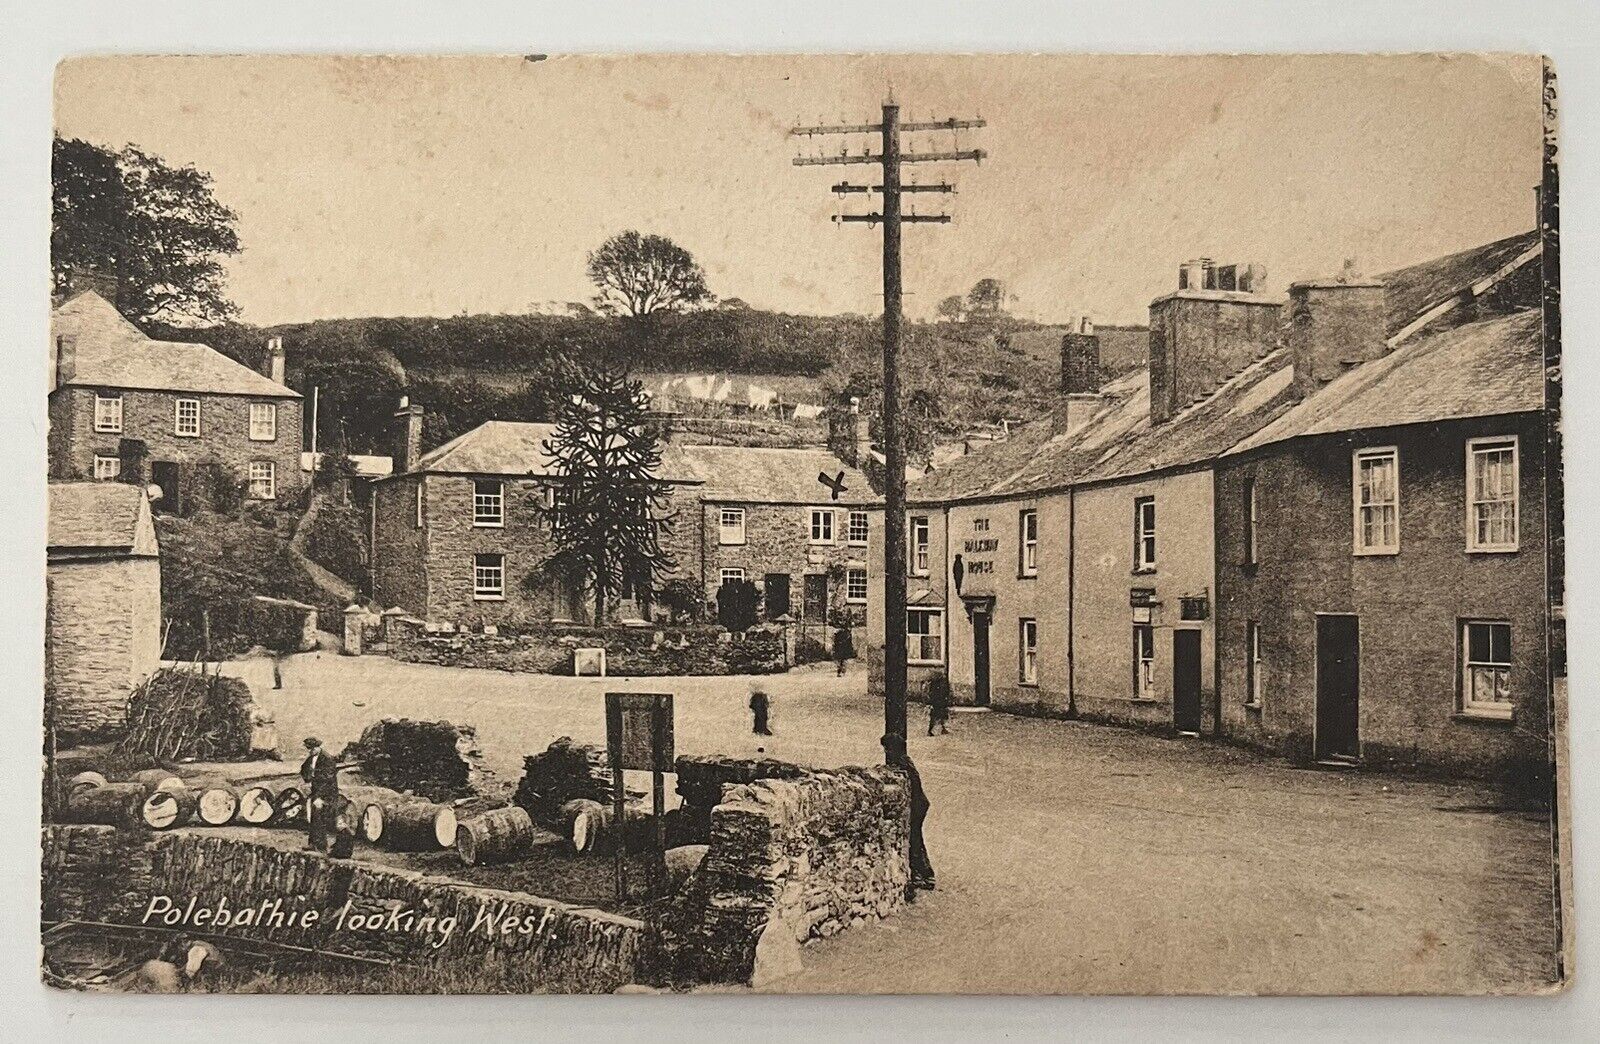 Polebathic, Cornwall c1920s Antique Postcard Looking West RPPC Real Photo